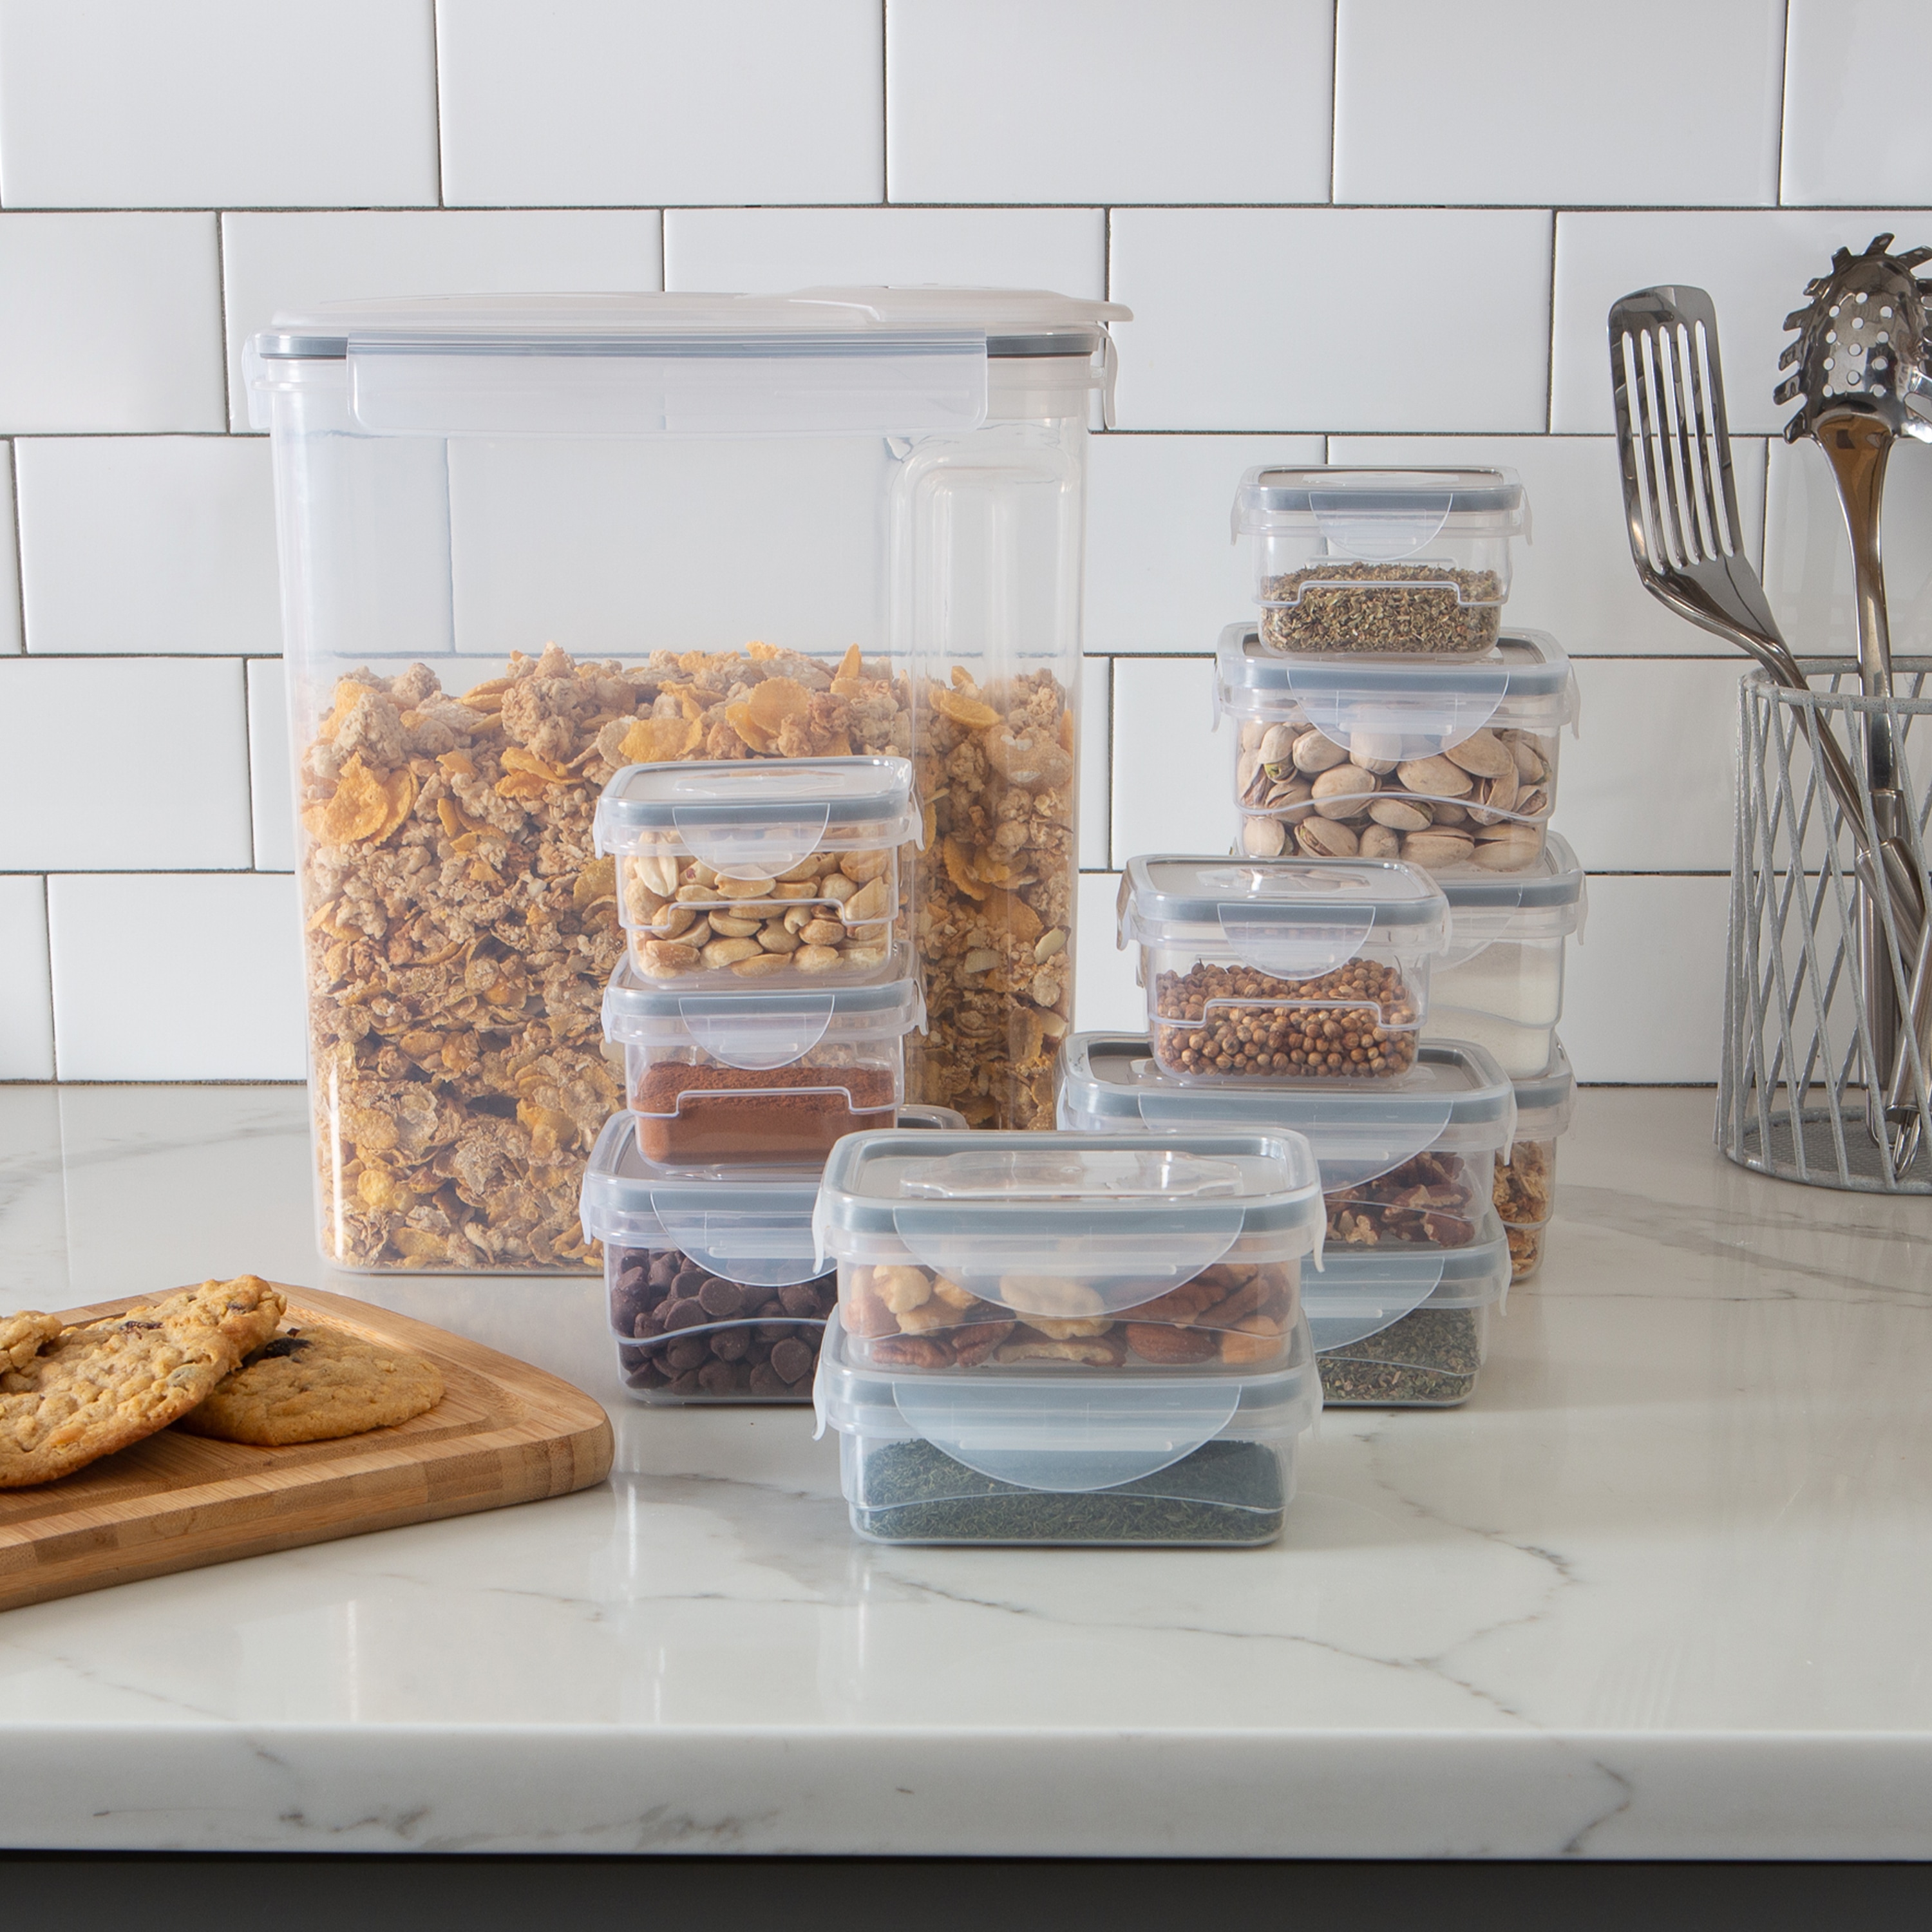 Kitchen Details Multisize Plastic Bpa-free Reusable Food Storage Container  with Lid in the Food Storage Containers department at